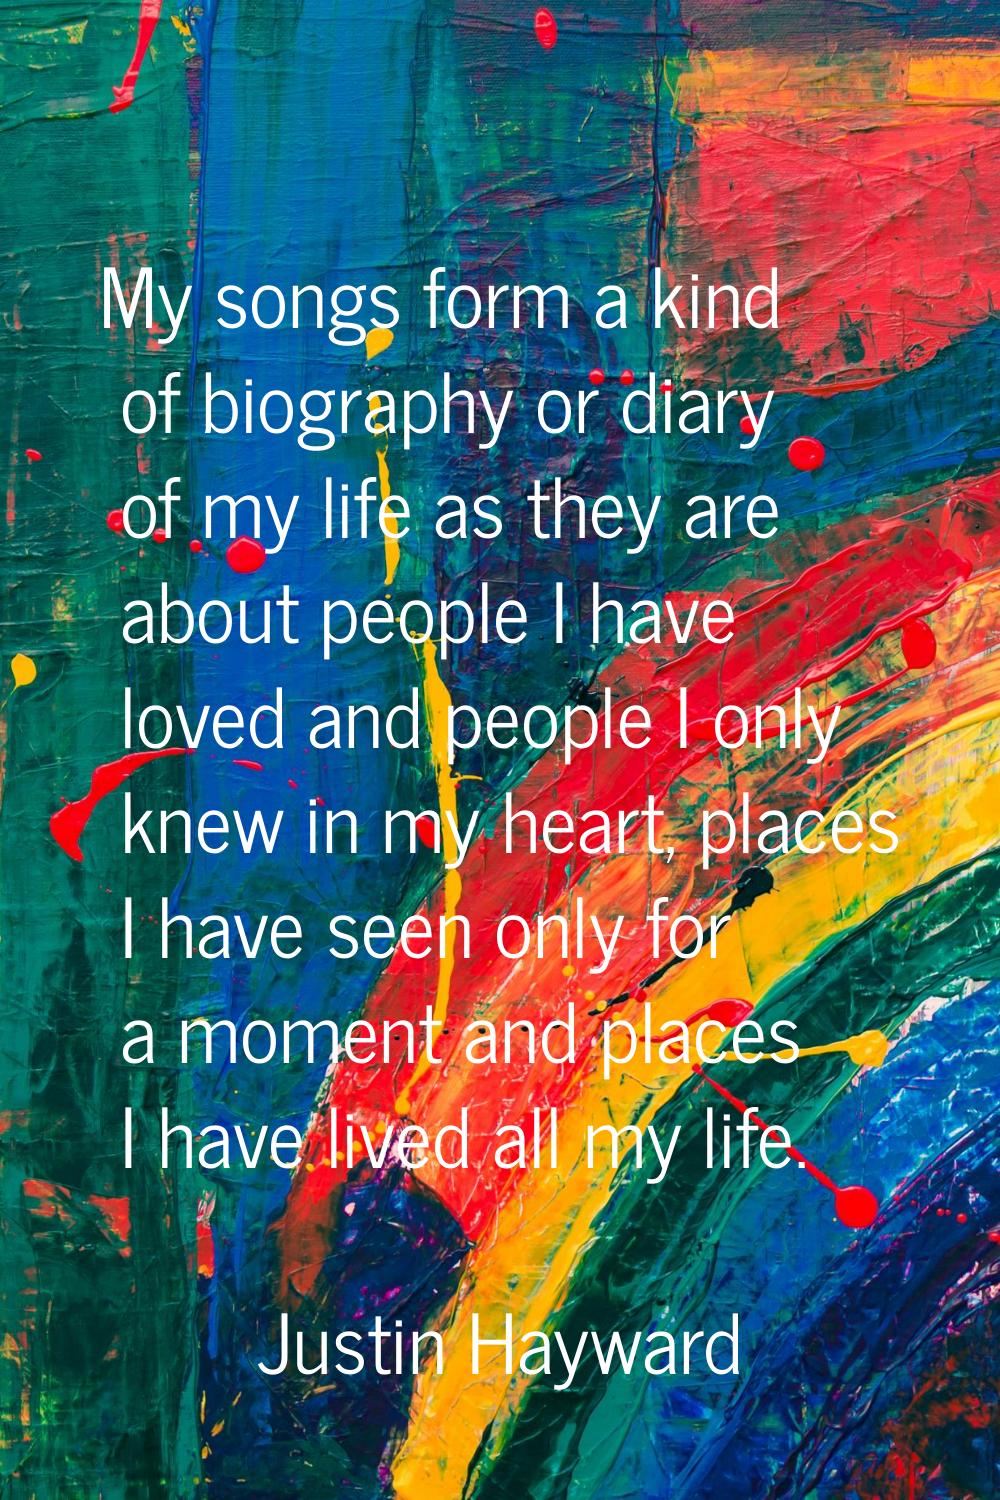 My songs form a kind of biography or diary of my life as they are about people I have loved and peo